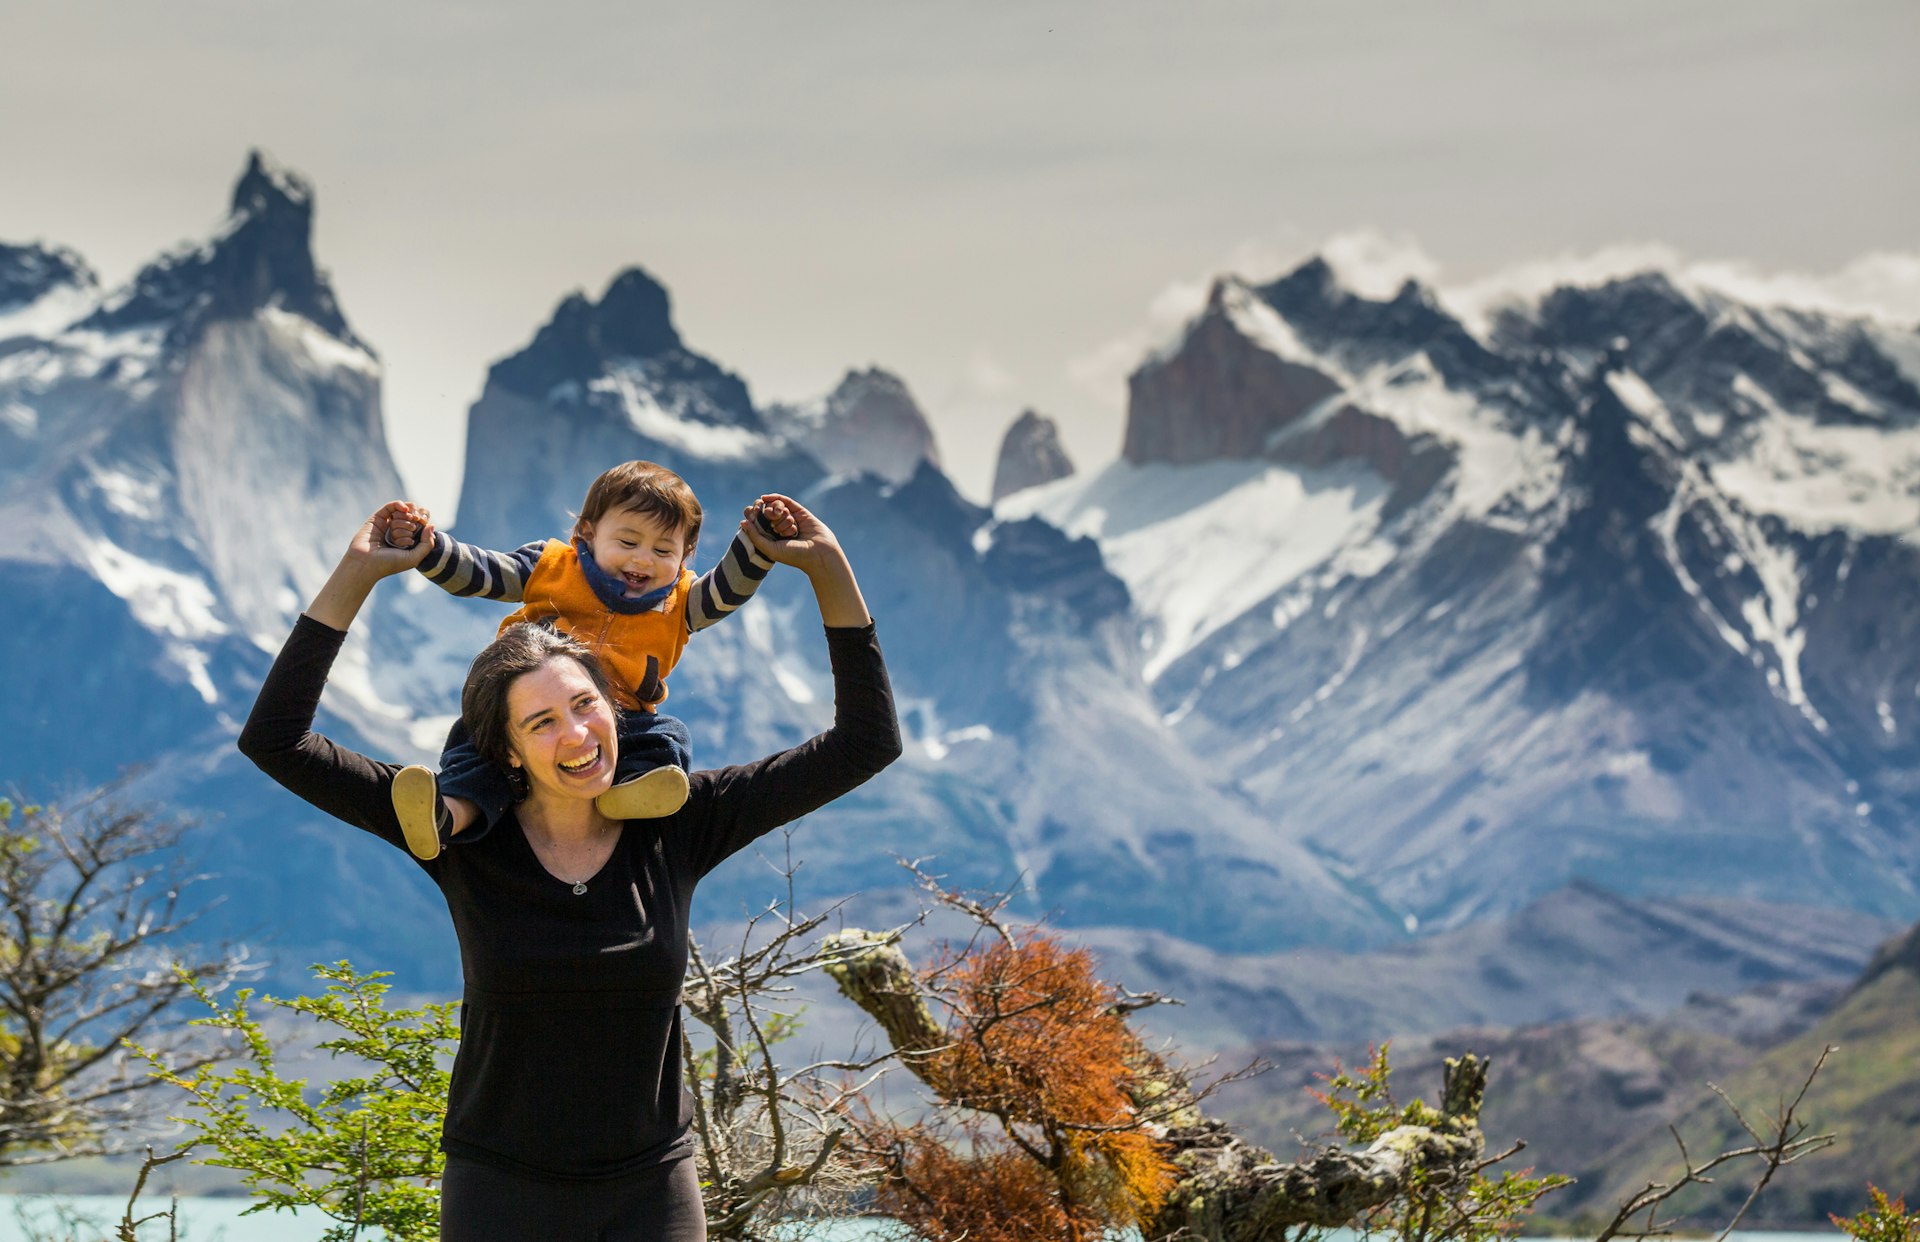 Happy mother and son enjoying the outdoors in Torres del Paine National Park, Patagonia, Chile, with the famous Torres del Paine mountains in the background.